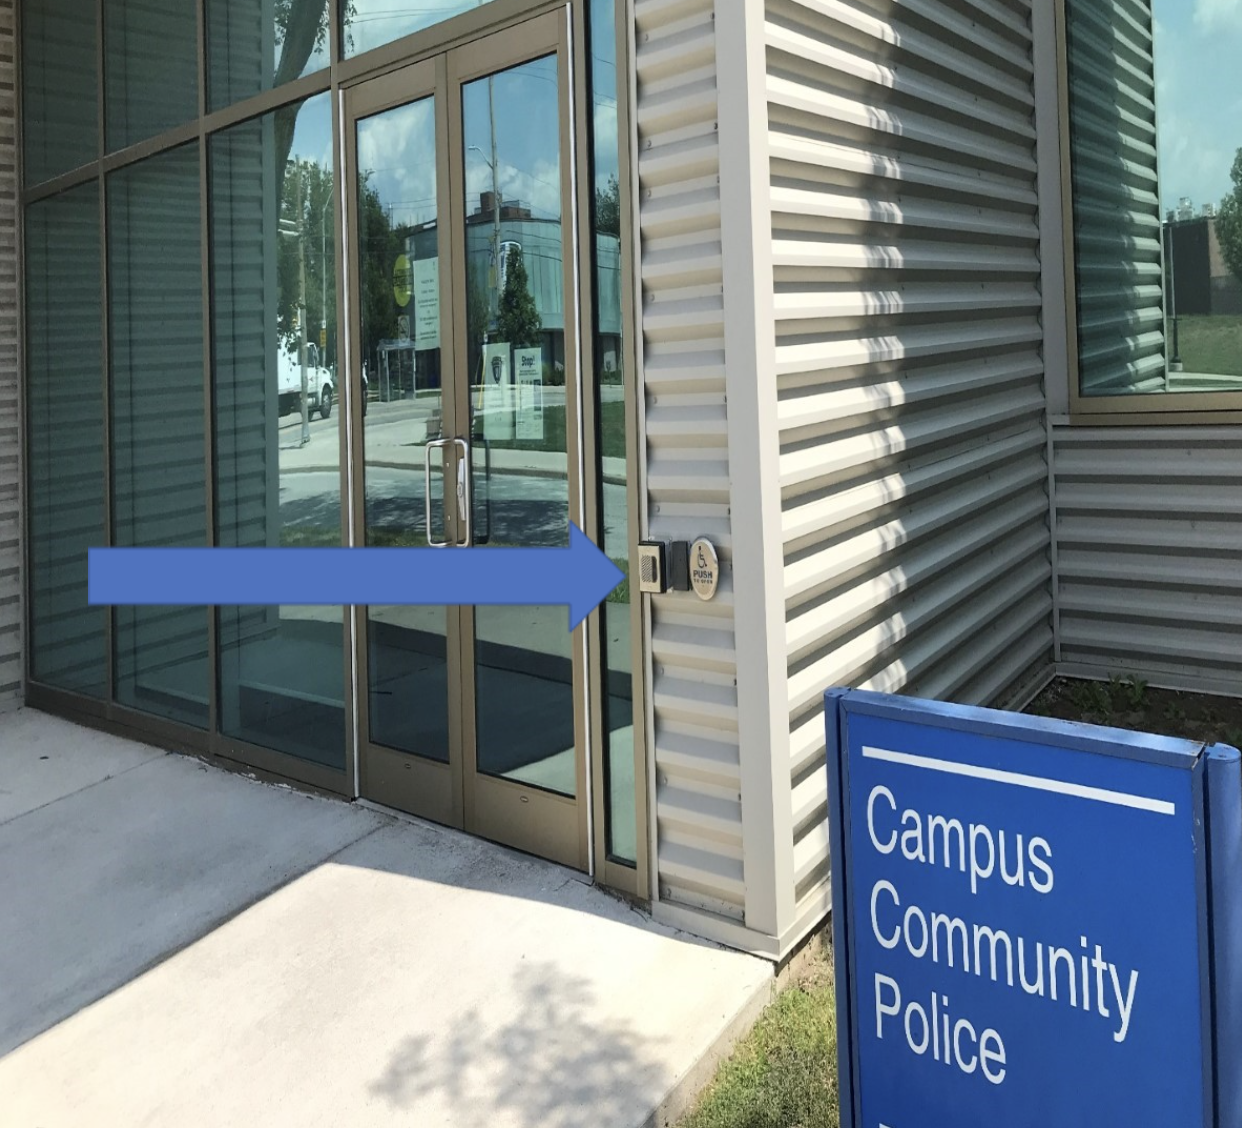 The main doors of the campus police office with a blue arrow pointing to the external speaker box.